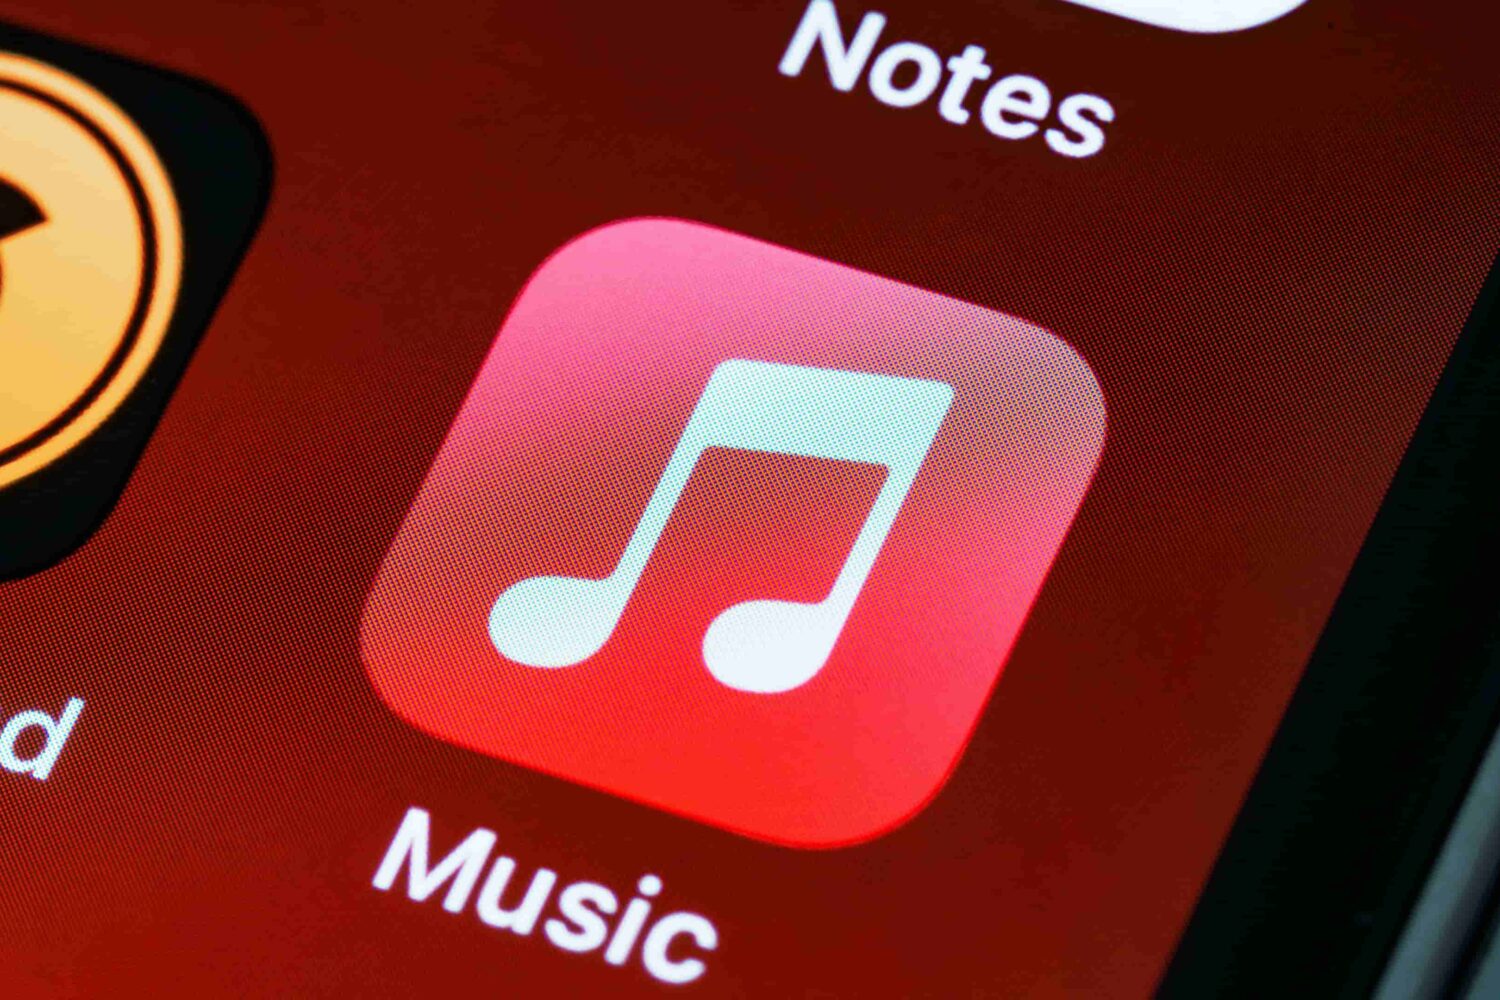 The icon for Apple's Music app is displayed on the home screen of an iPhone in this close-up photograph